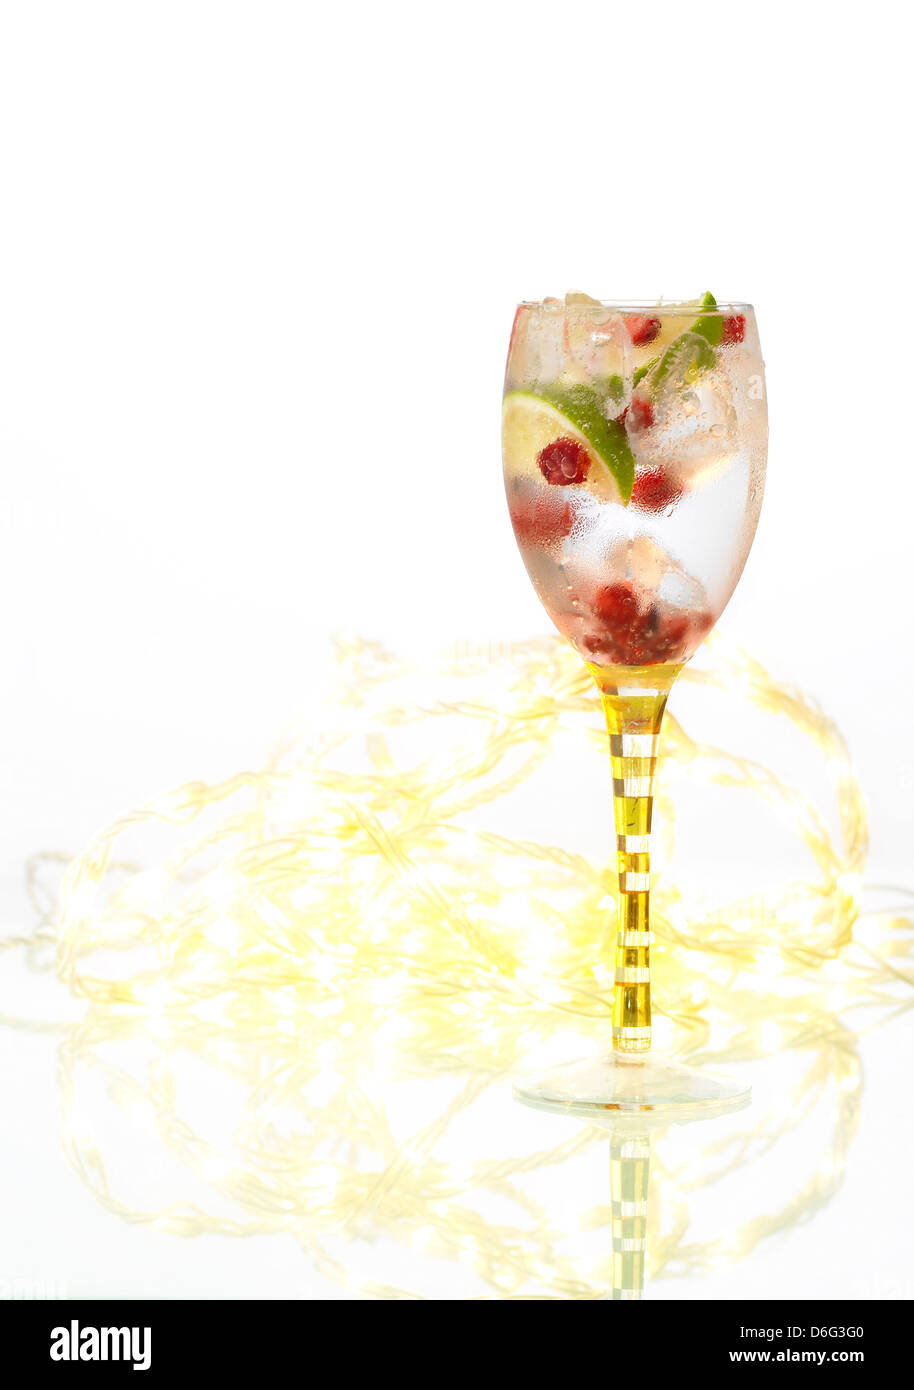 Christmas party drink gin e cranberry Foto Stock